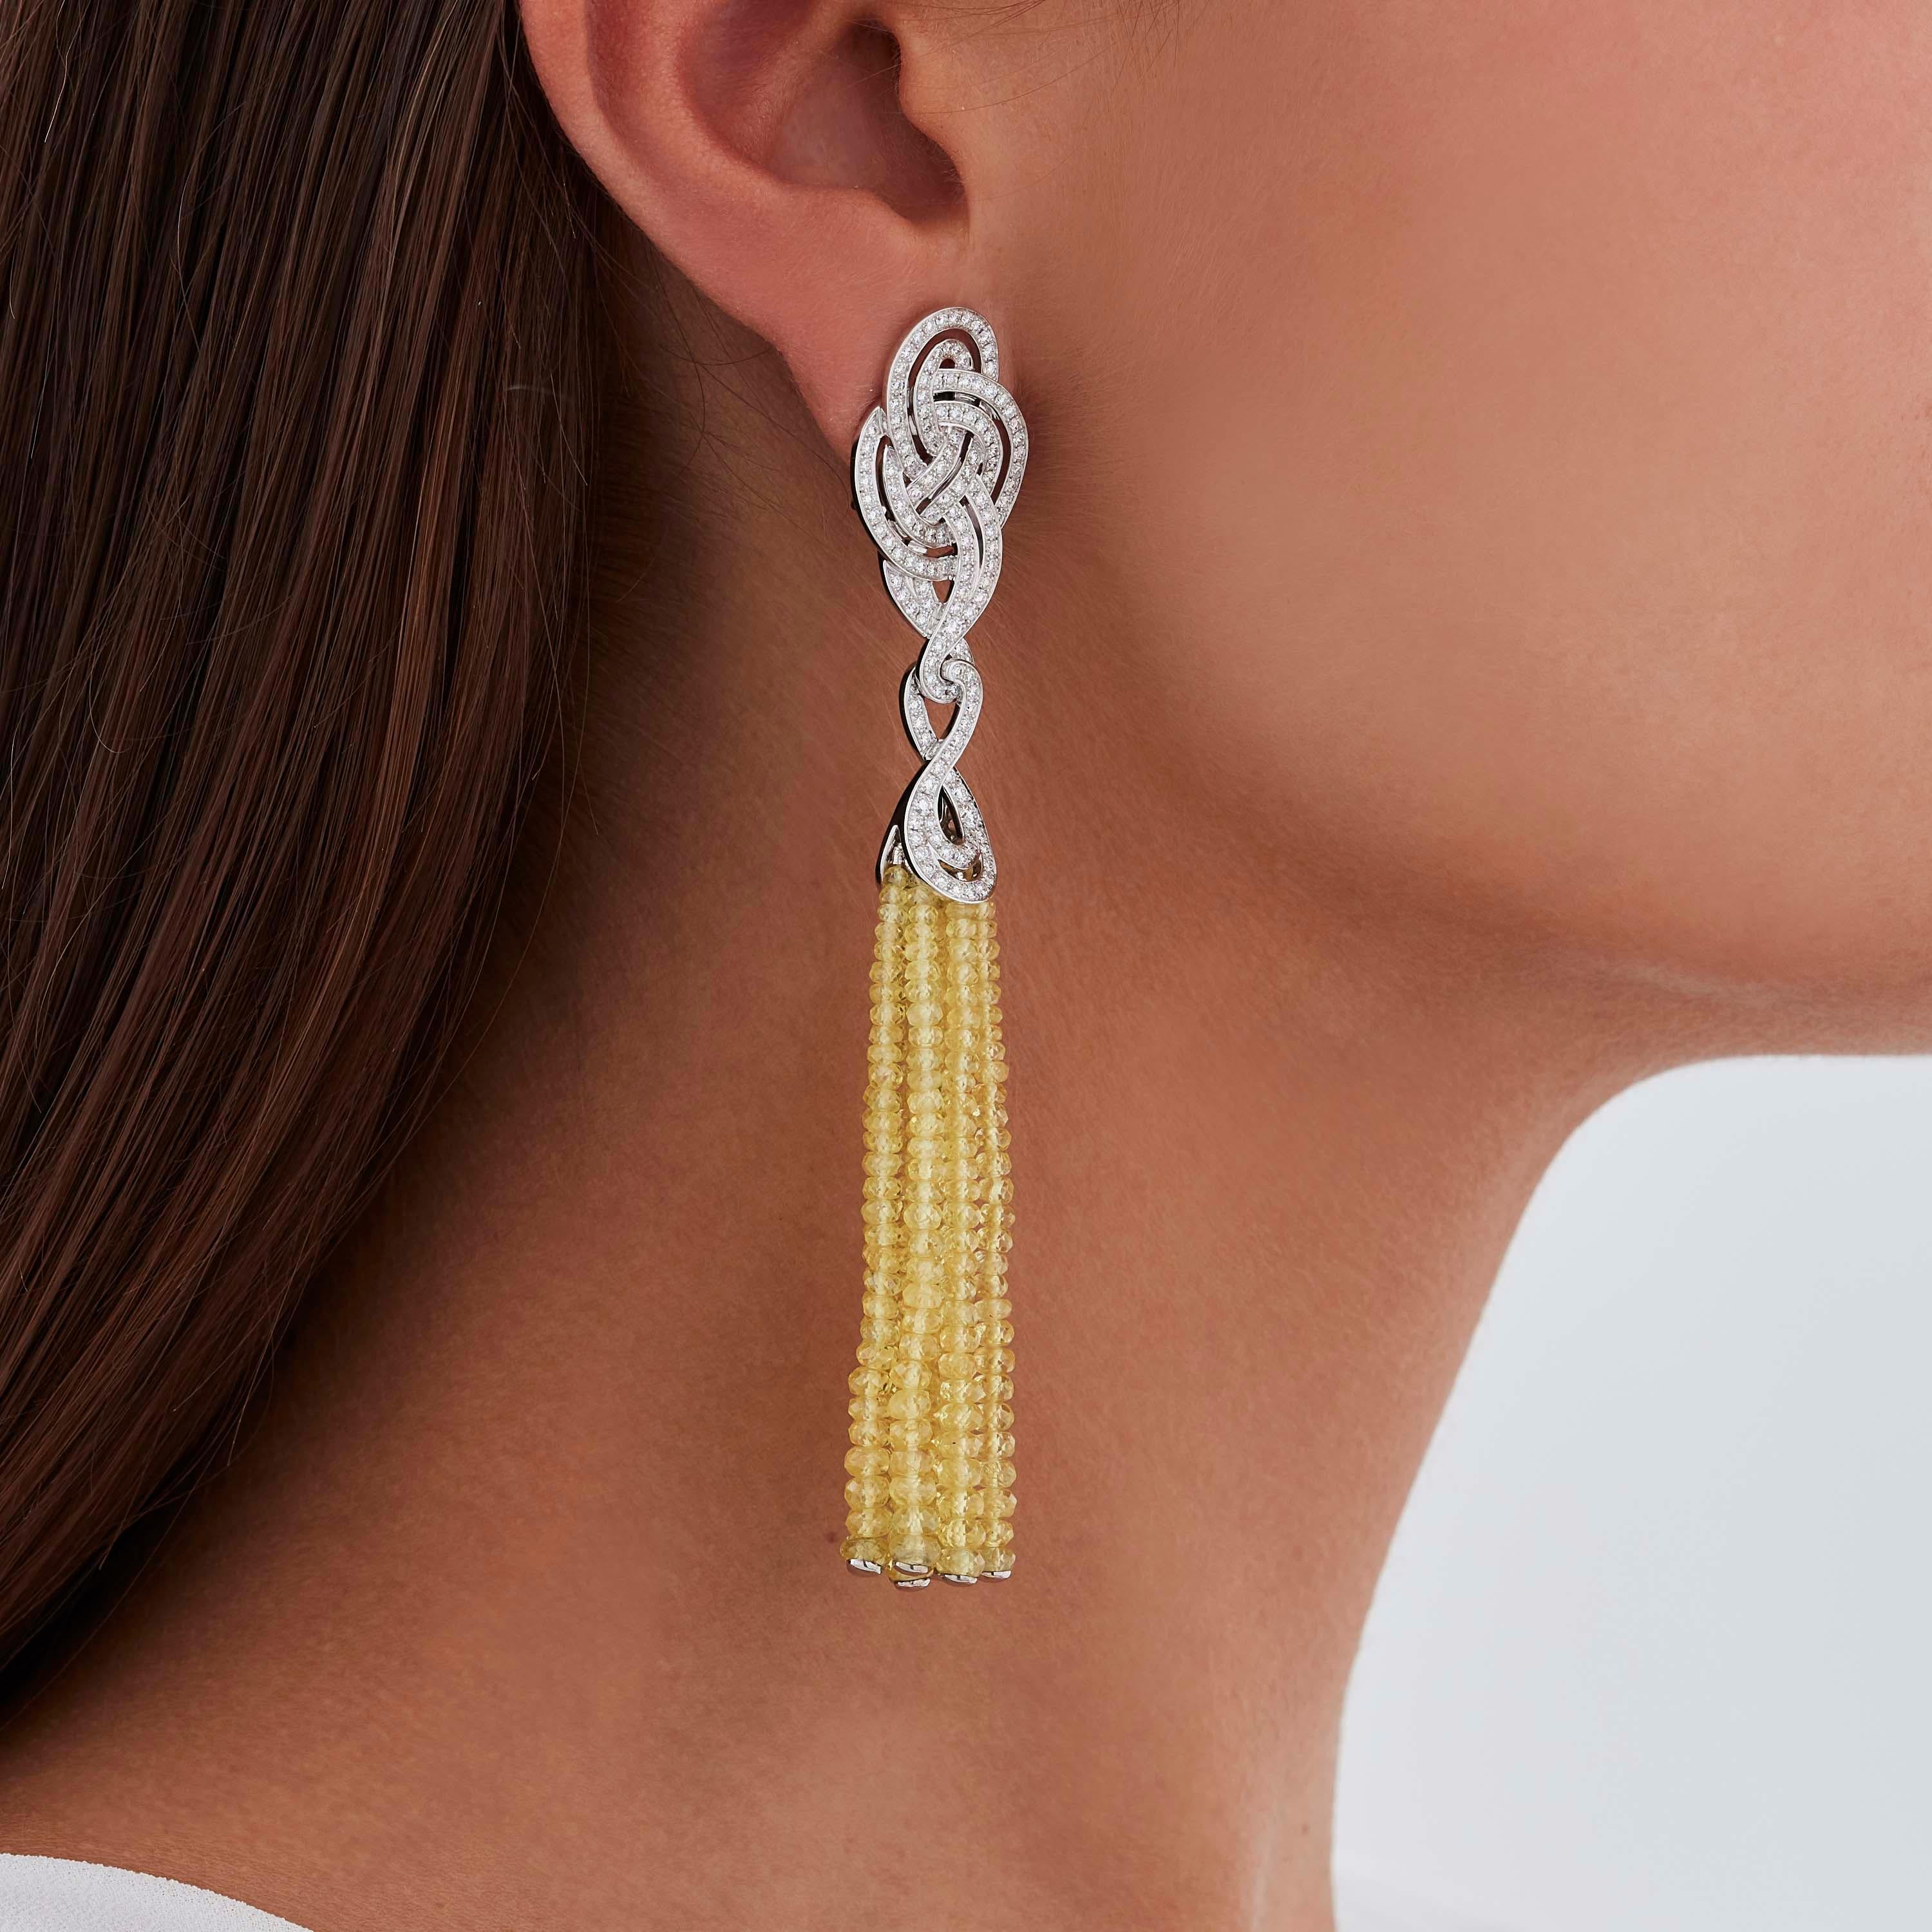 A House of Garrard pair of 18 karat white gold tassel earrings from the 'Entanglement' collection, set with round white diamonds and faceted yellow sapphire beads. 

284 round white diamonds weighing: 2.04cts
18 strands of faceted yellow sapphire